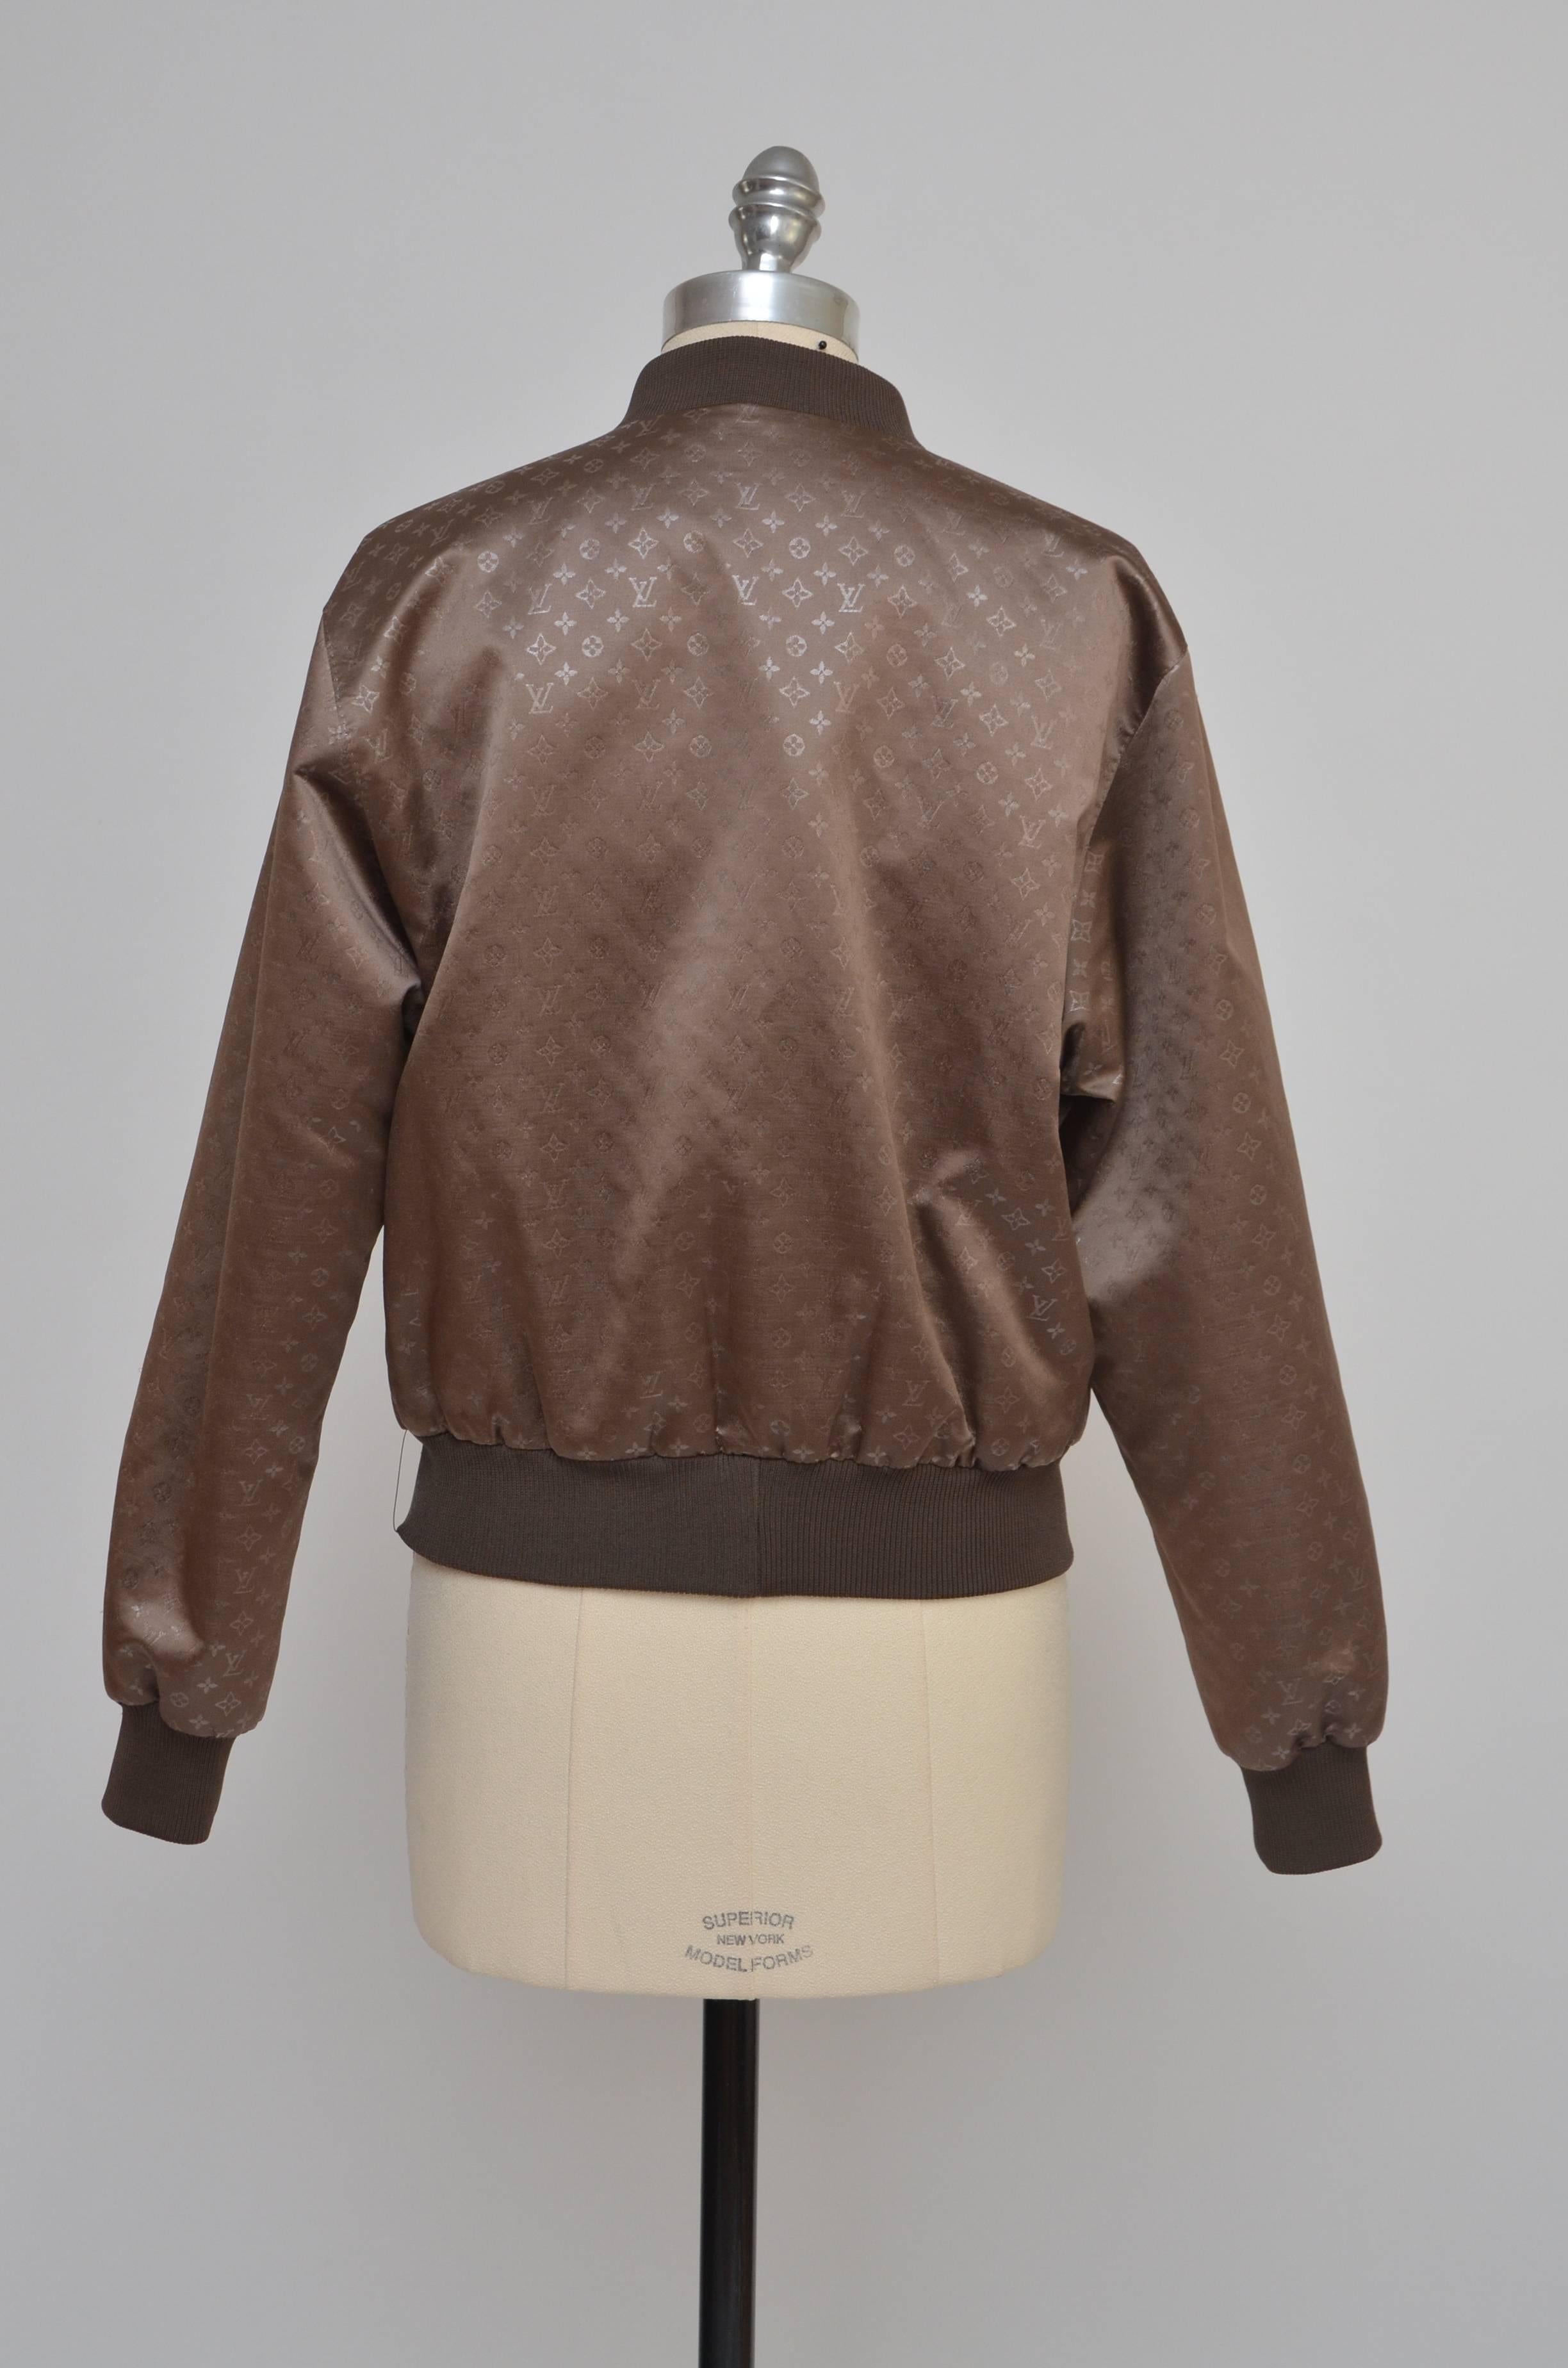 Louis Vuitton silk monogram jacket  with dual welt pockets at sides, rib knit trim and button clasp  snap closures at center front.
Size 38 FR.
New condition without tags.
Approximate measure:Bust: 40